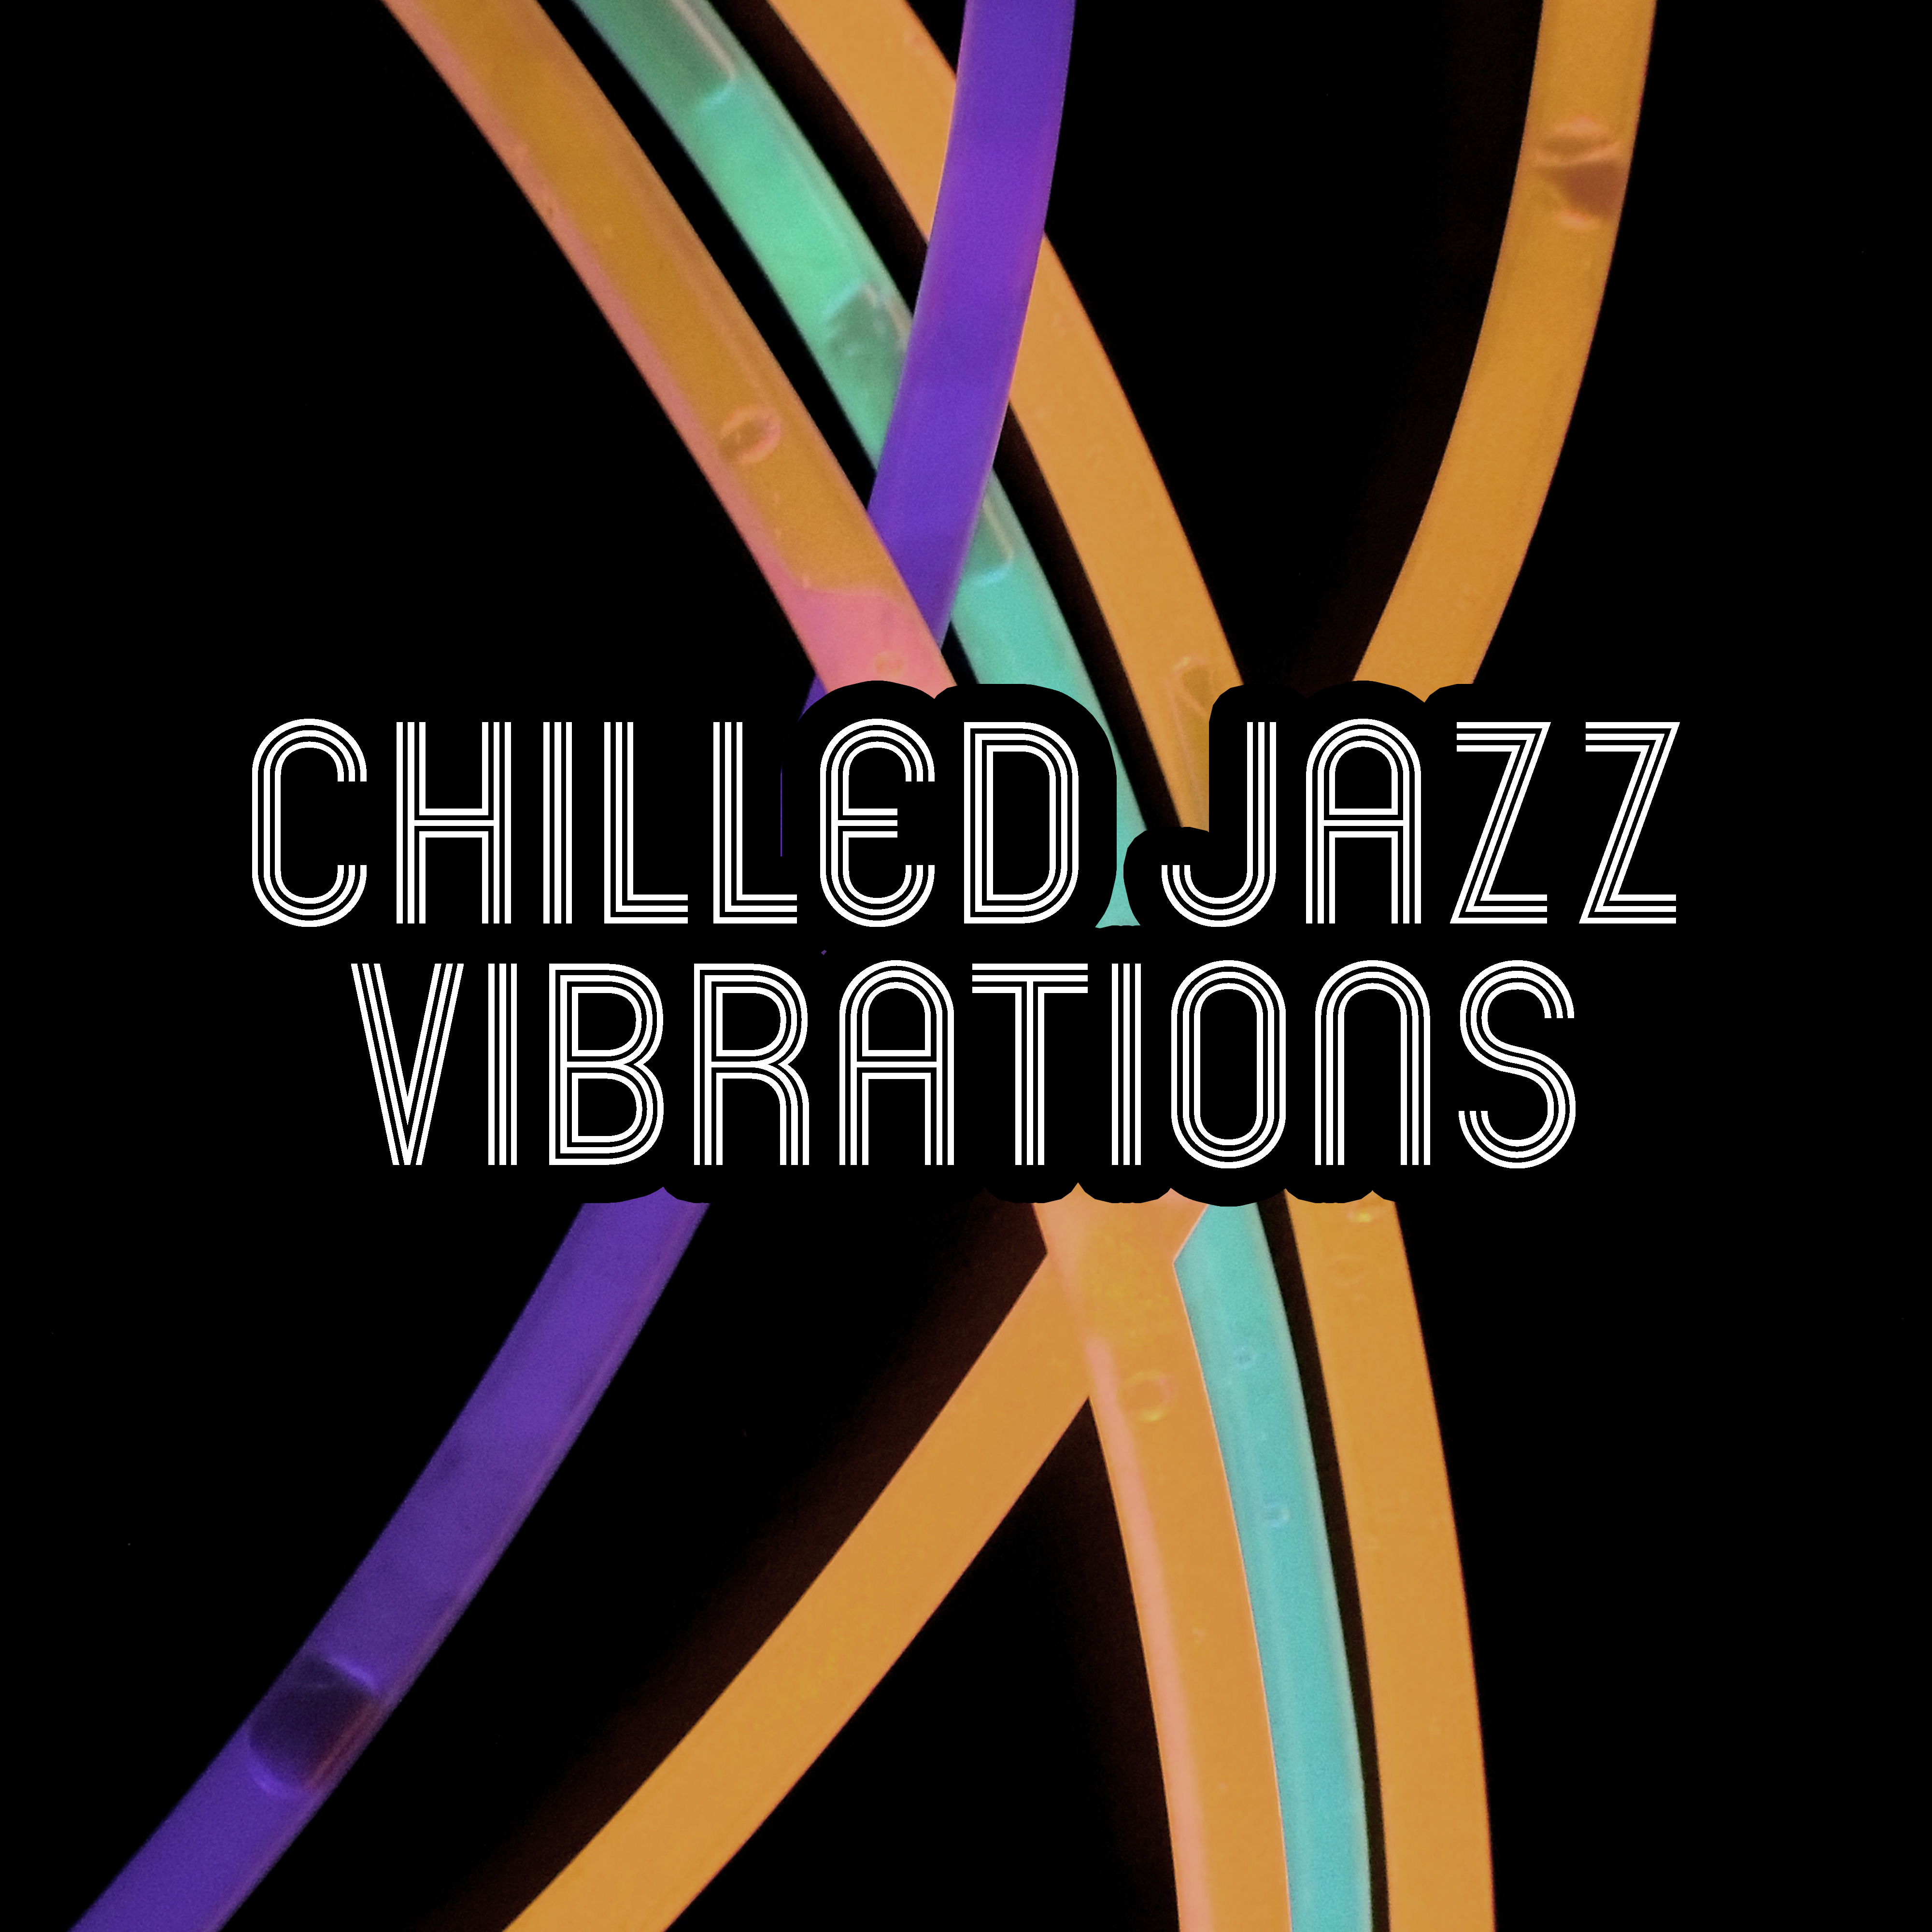 Chilled Jazz Vibrations  Relaxing Jazz Music, Instrumental Piano, Relaxing Evening, Rest